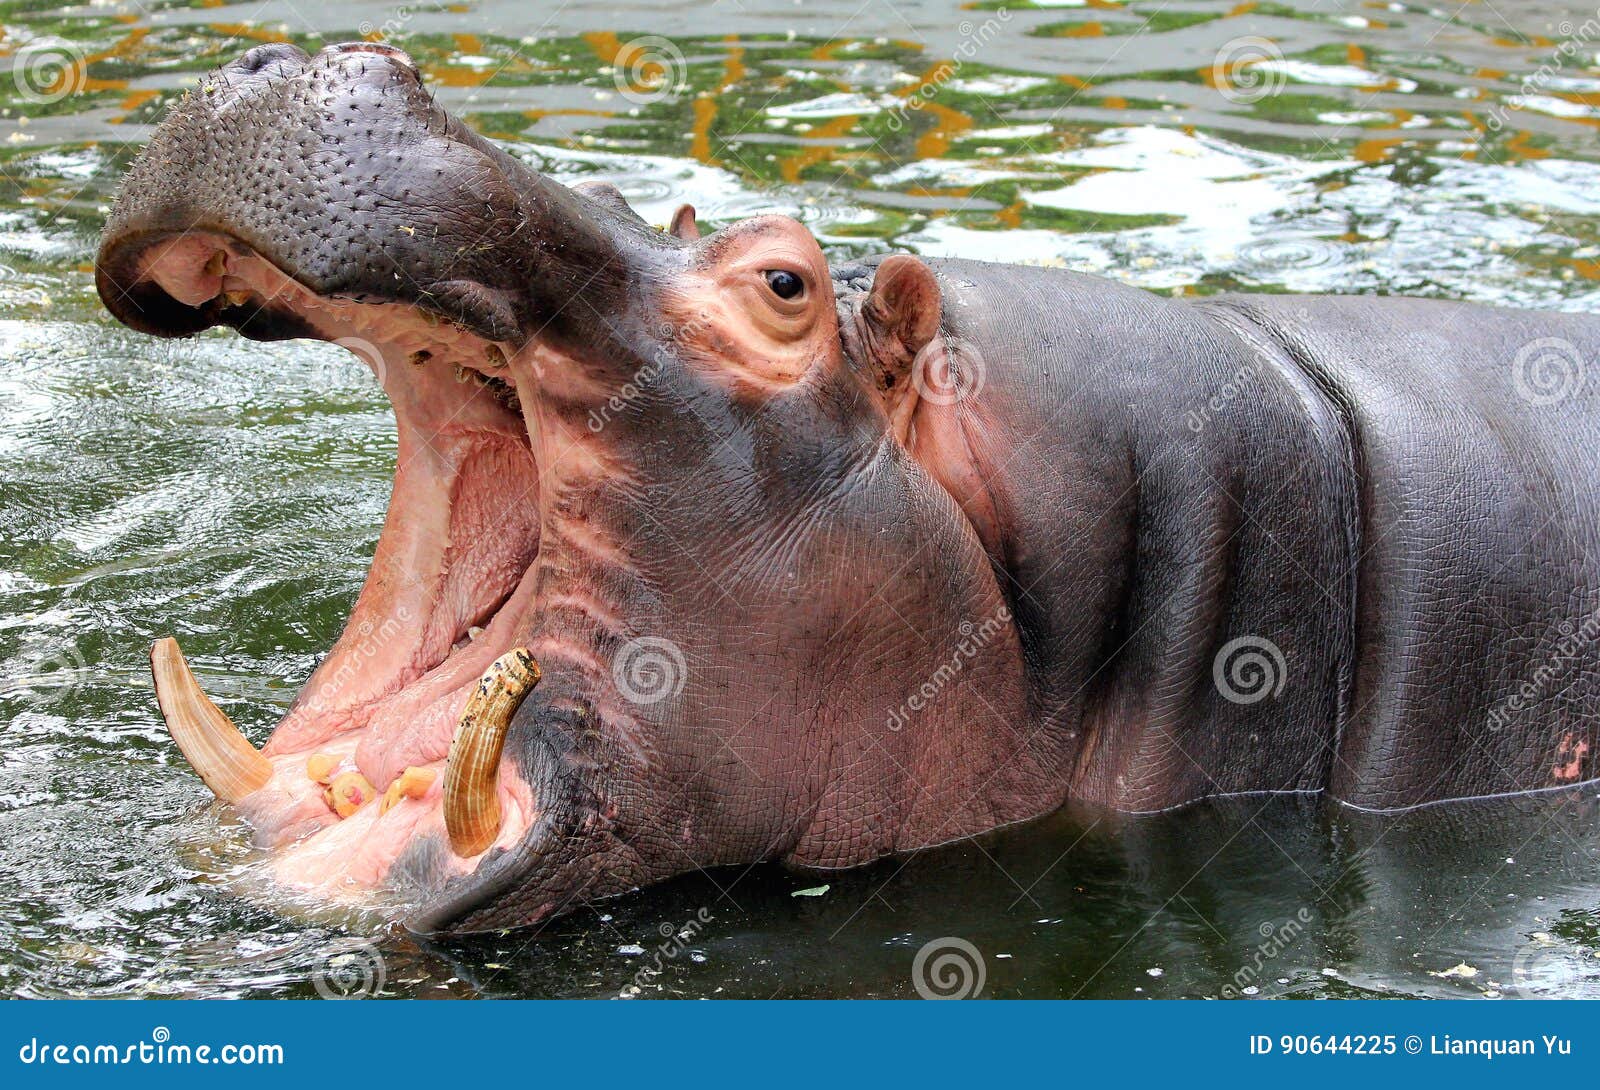 Hippo open the big mouth stock image. Image of kenya - 90644225